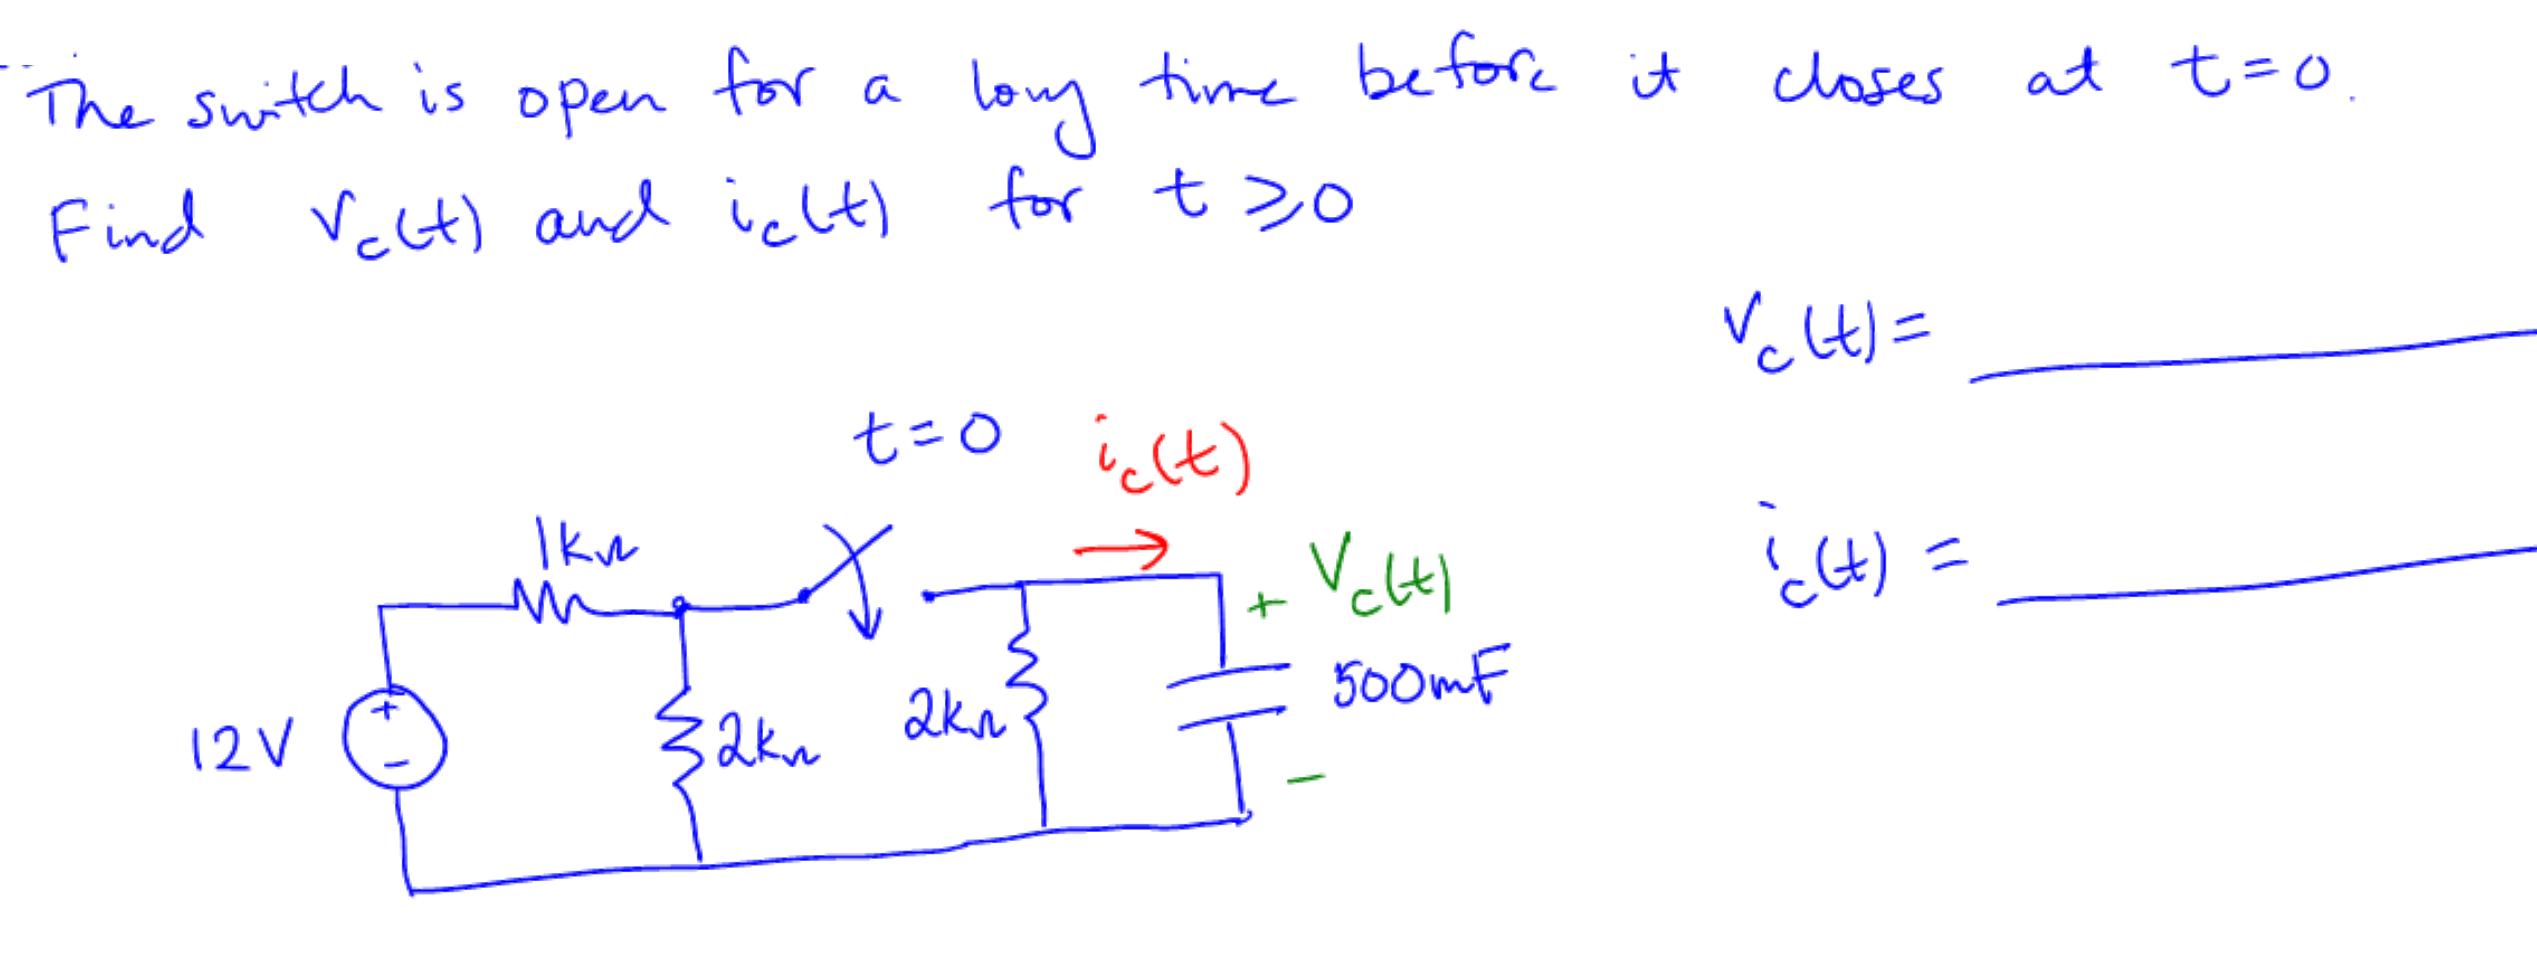 The Switch is for a open Find Velt) and icht) for t>o 12V 1  32 long time before it t=0 ic(t) 2  + Velti